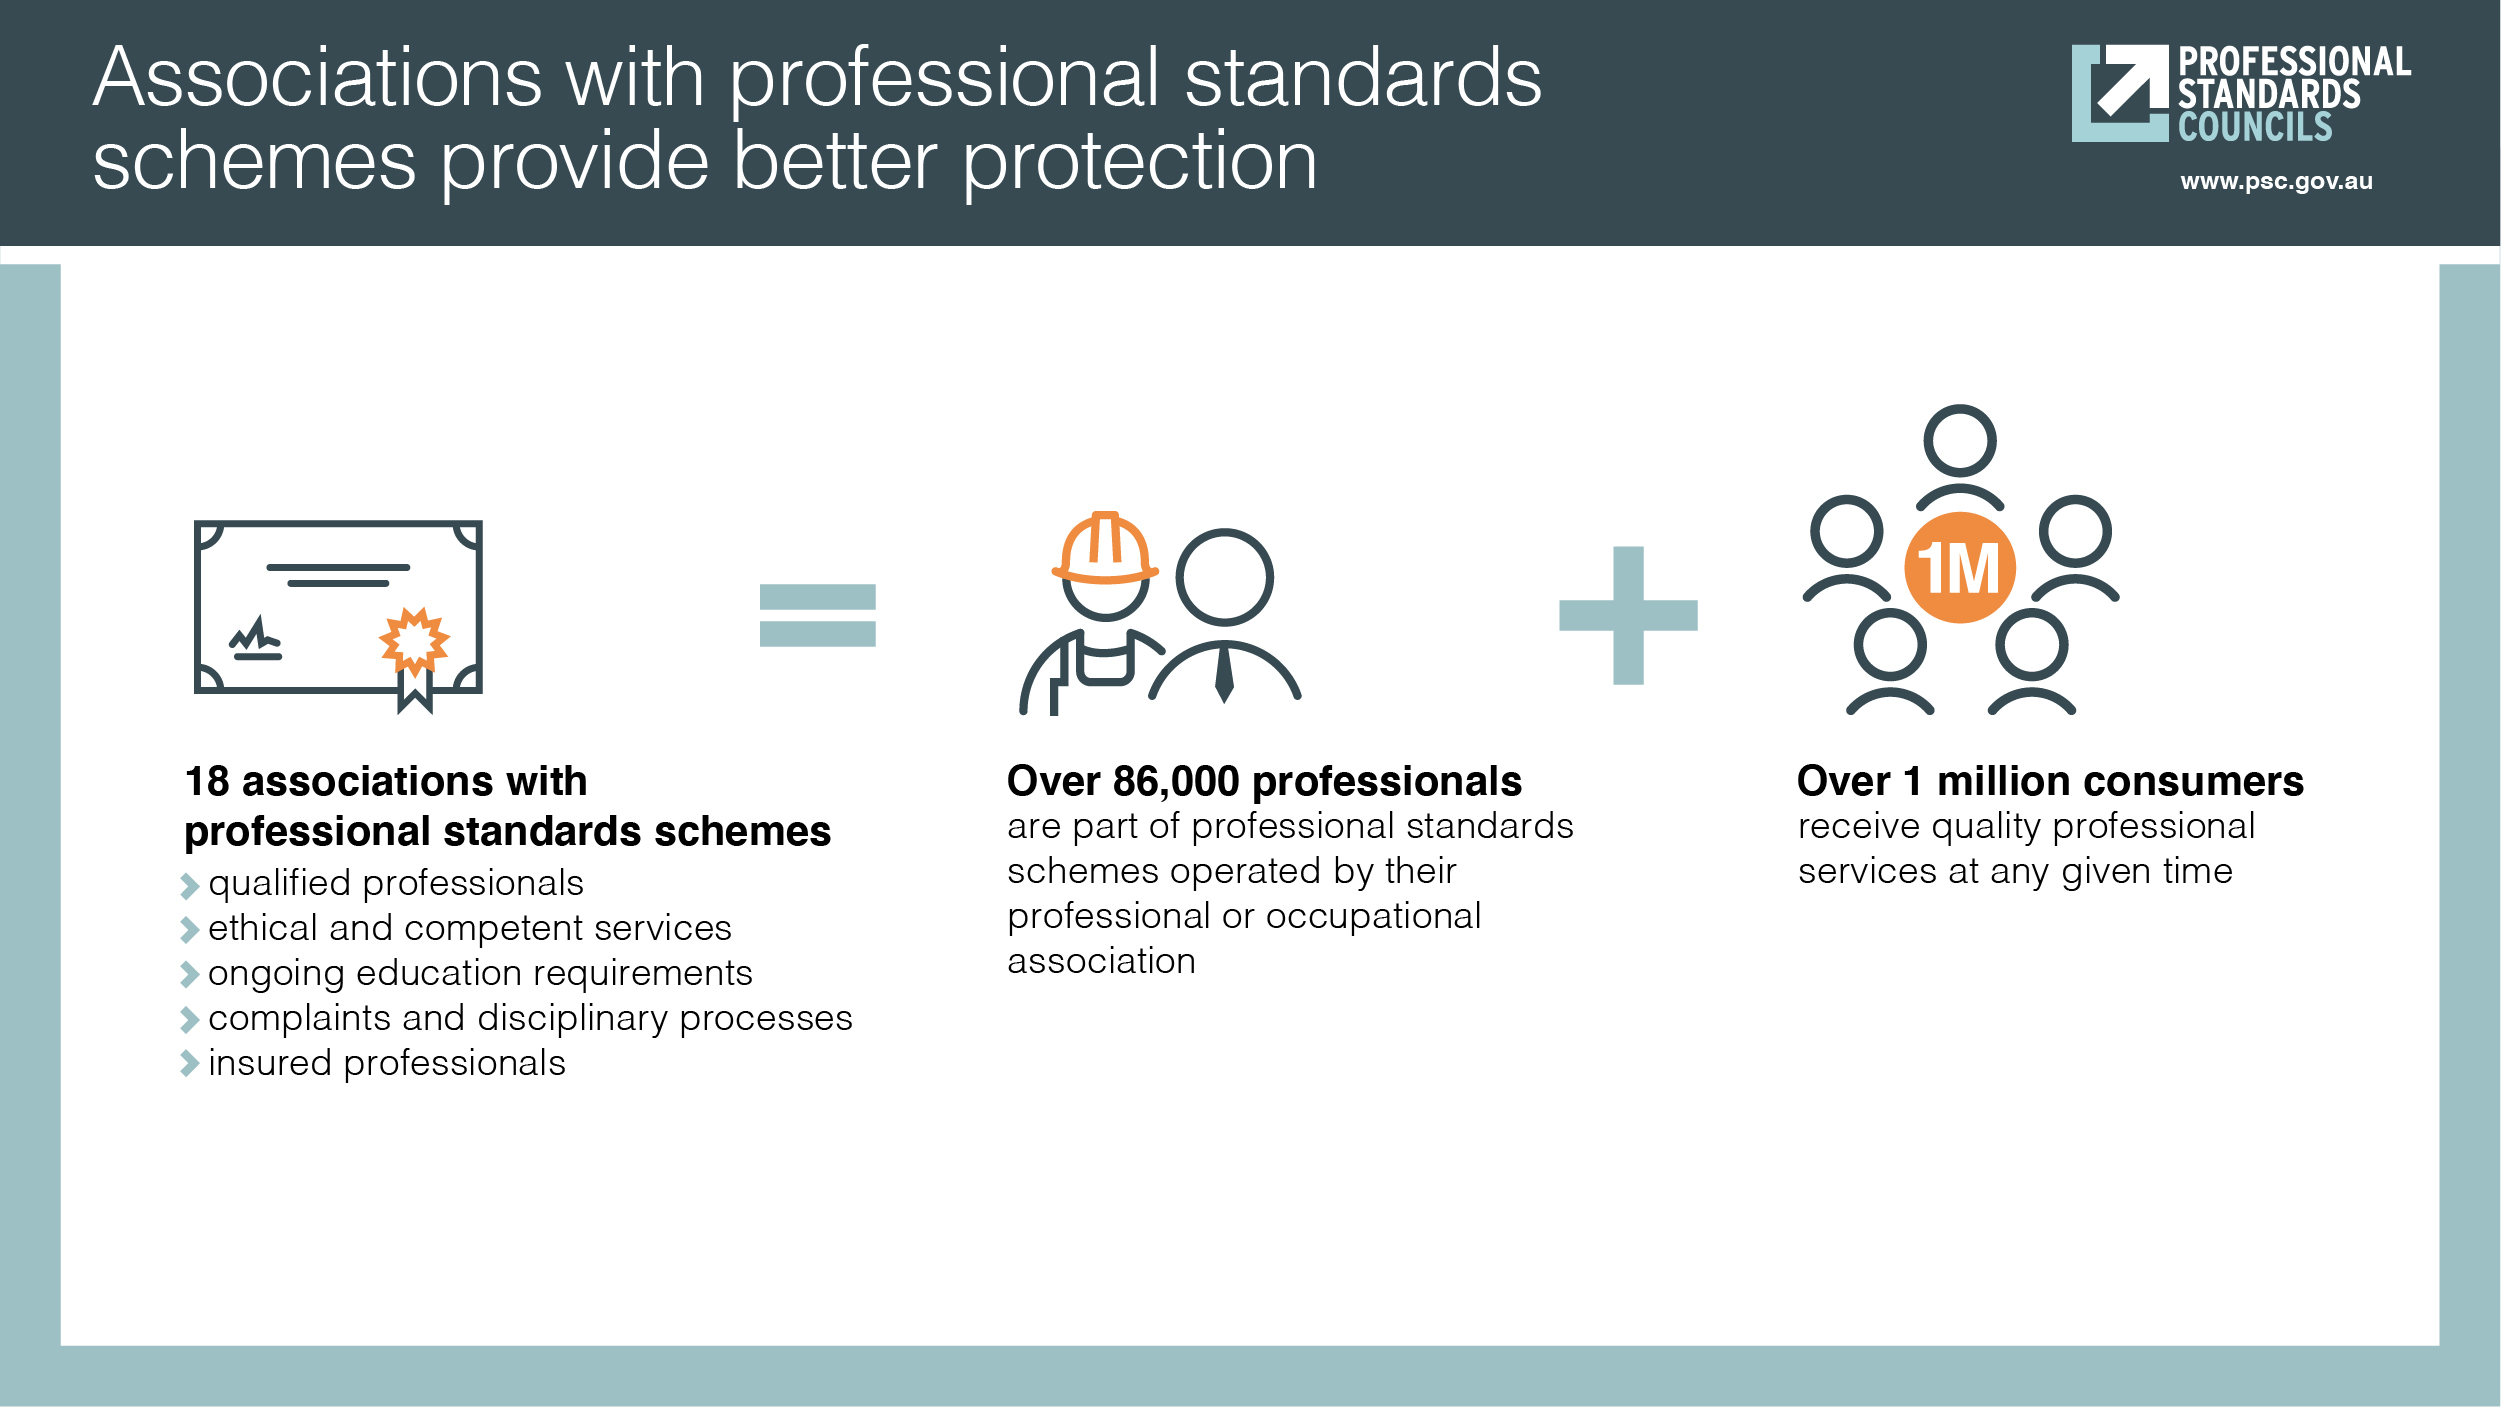 Associations with professional standards schemes provide better protection